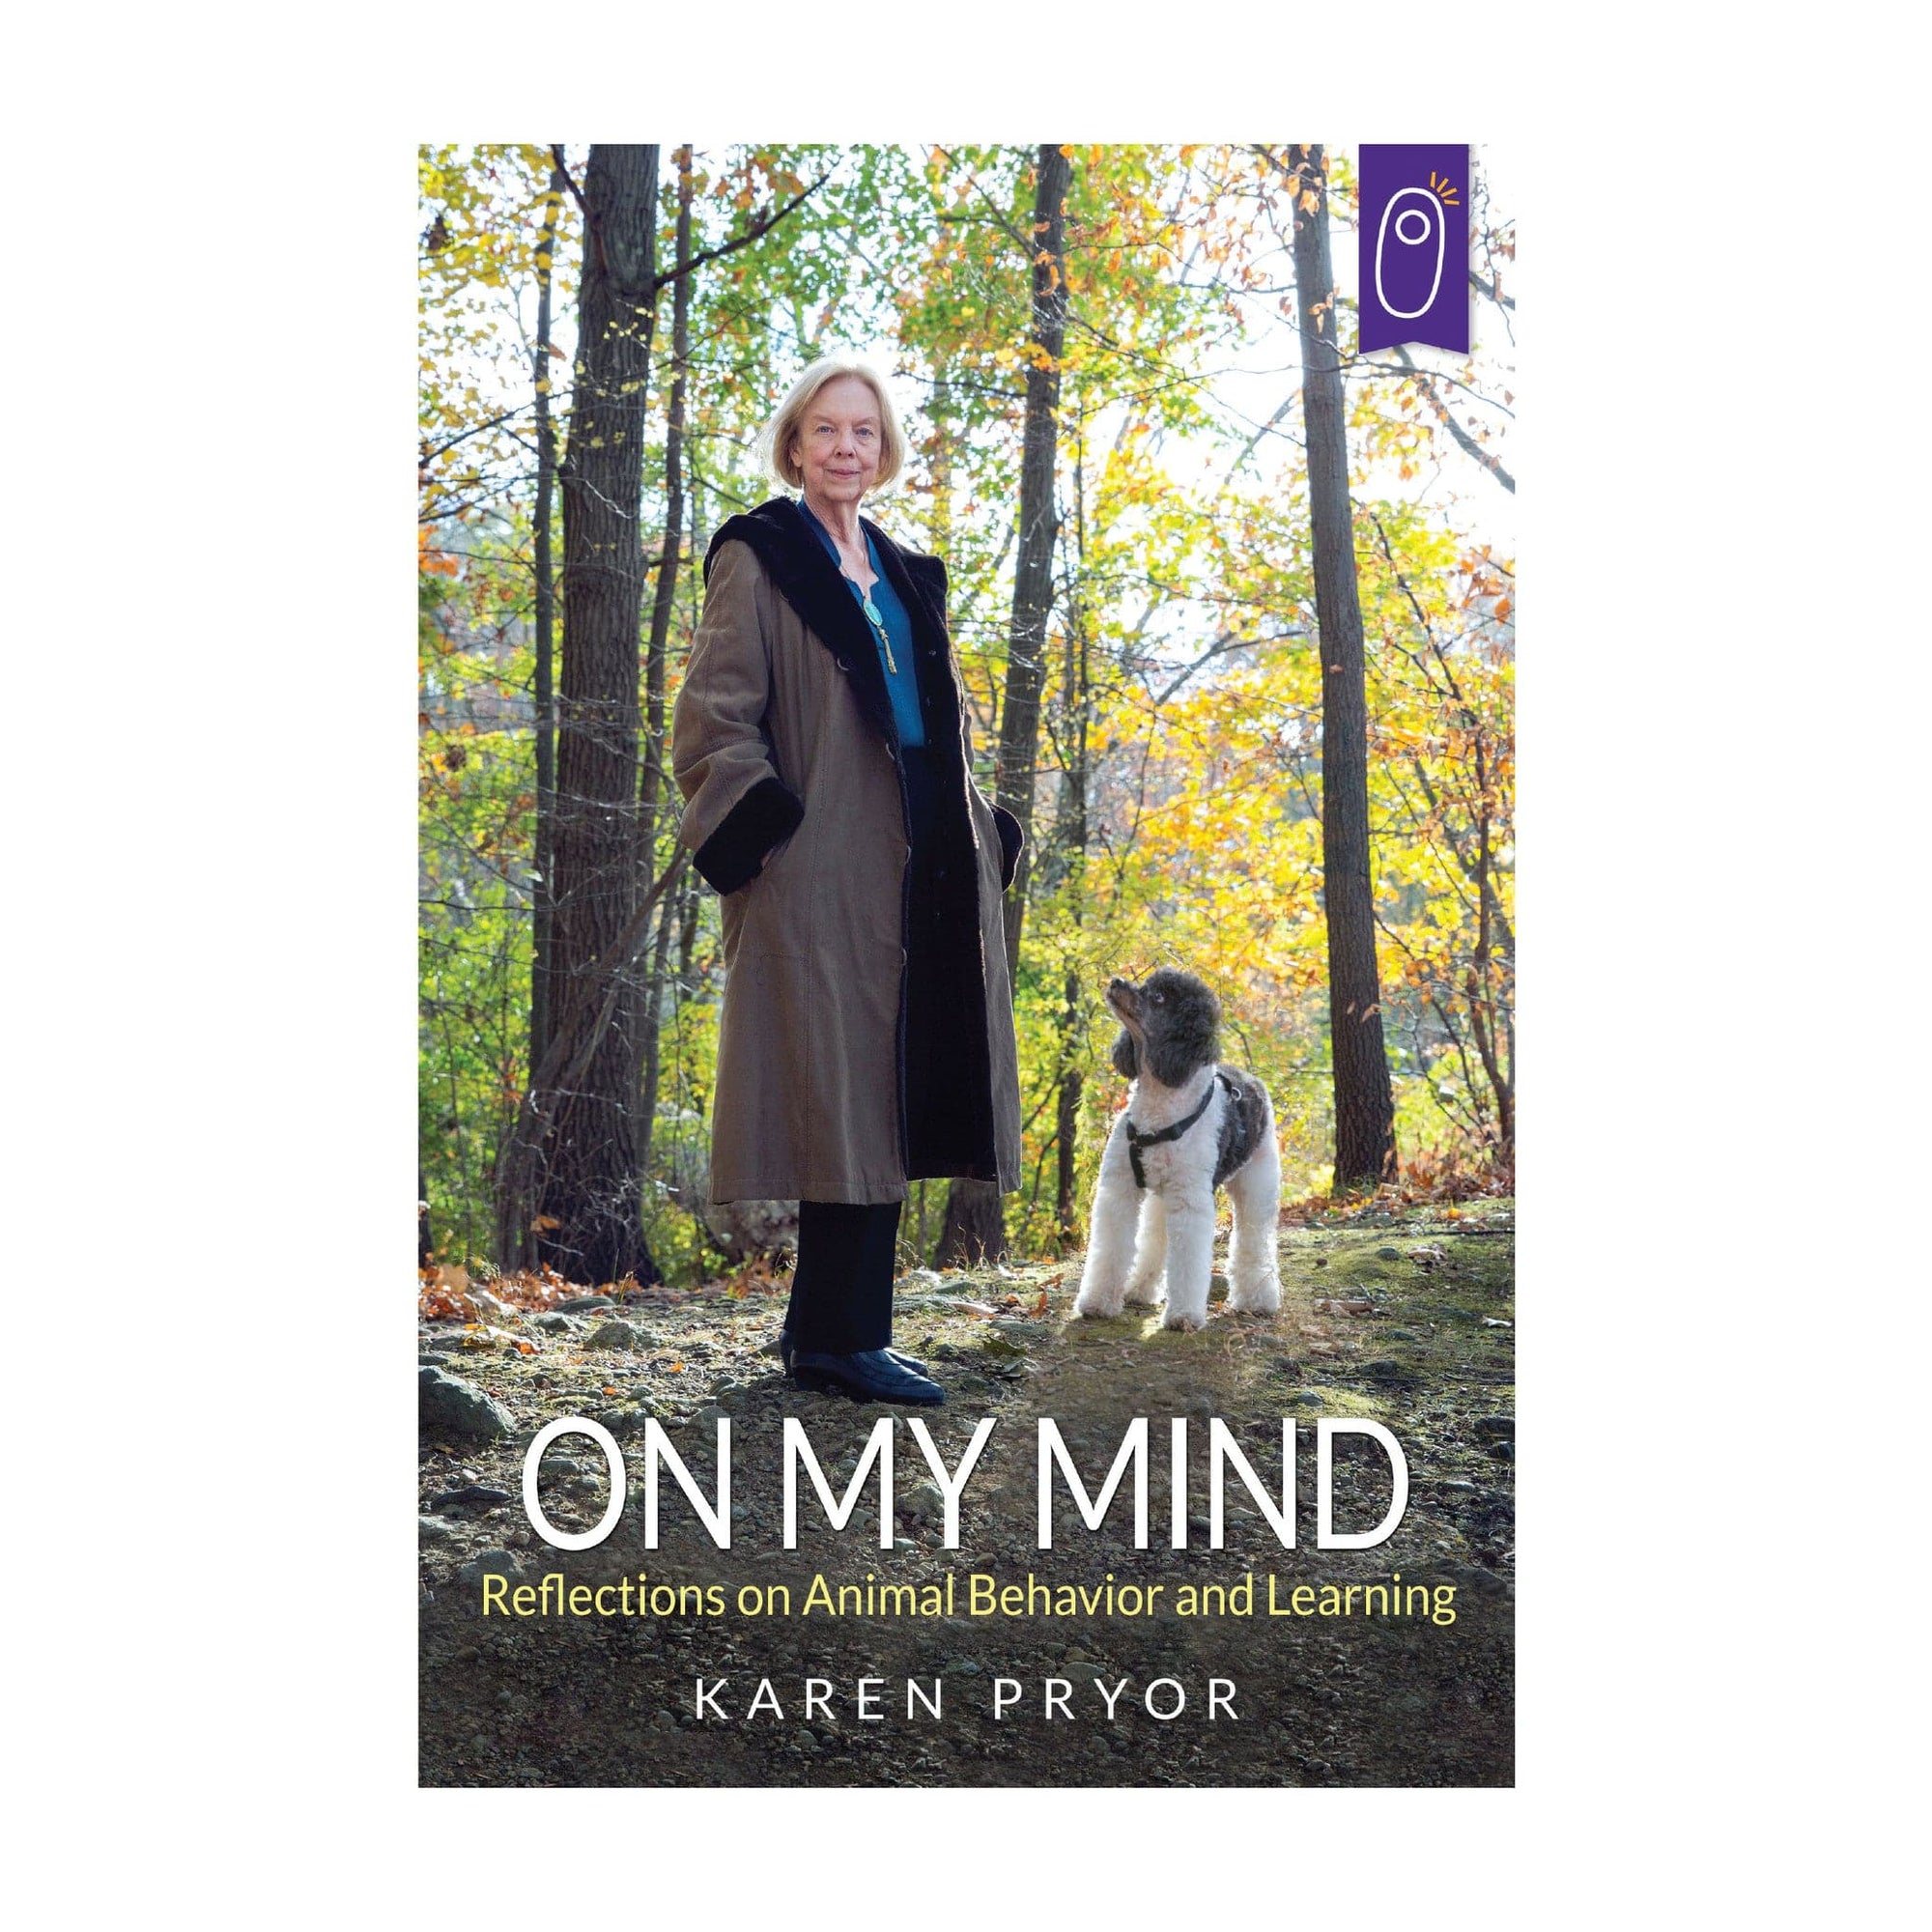 On My Mind: Reflections on Animal Behavior and Learning by Karen Pryor